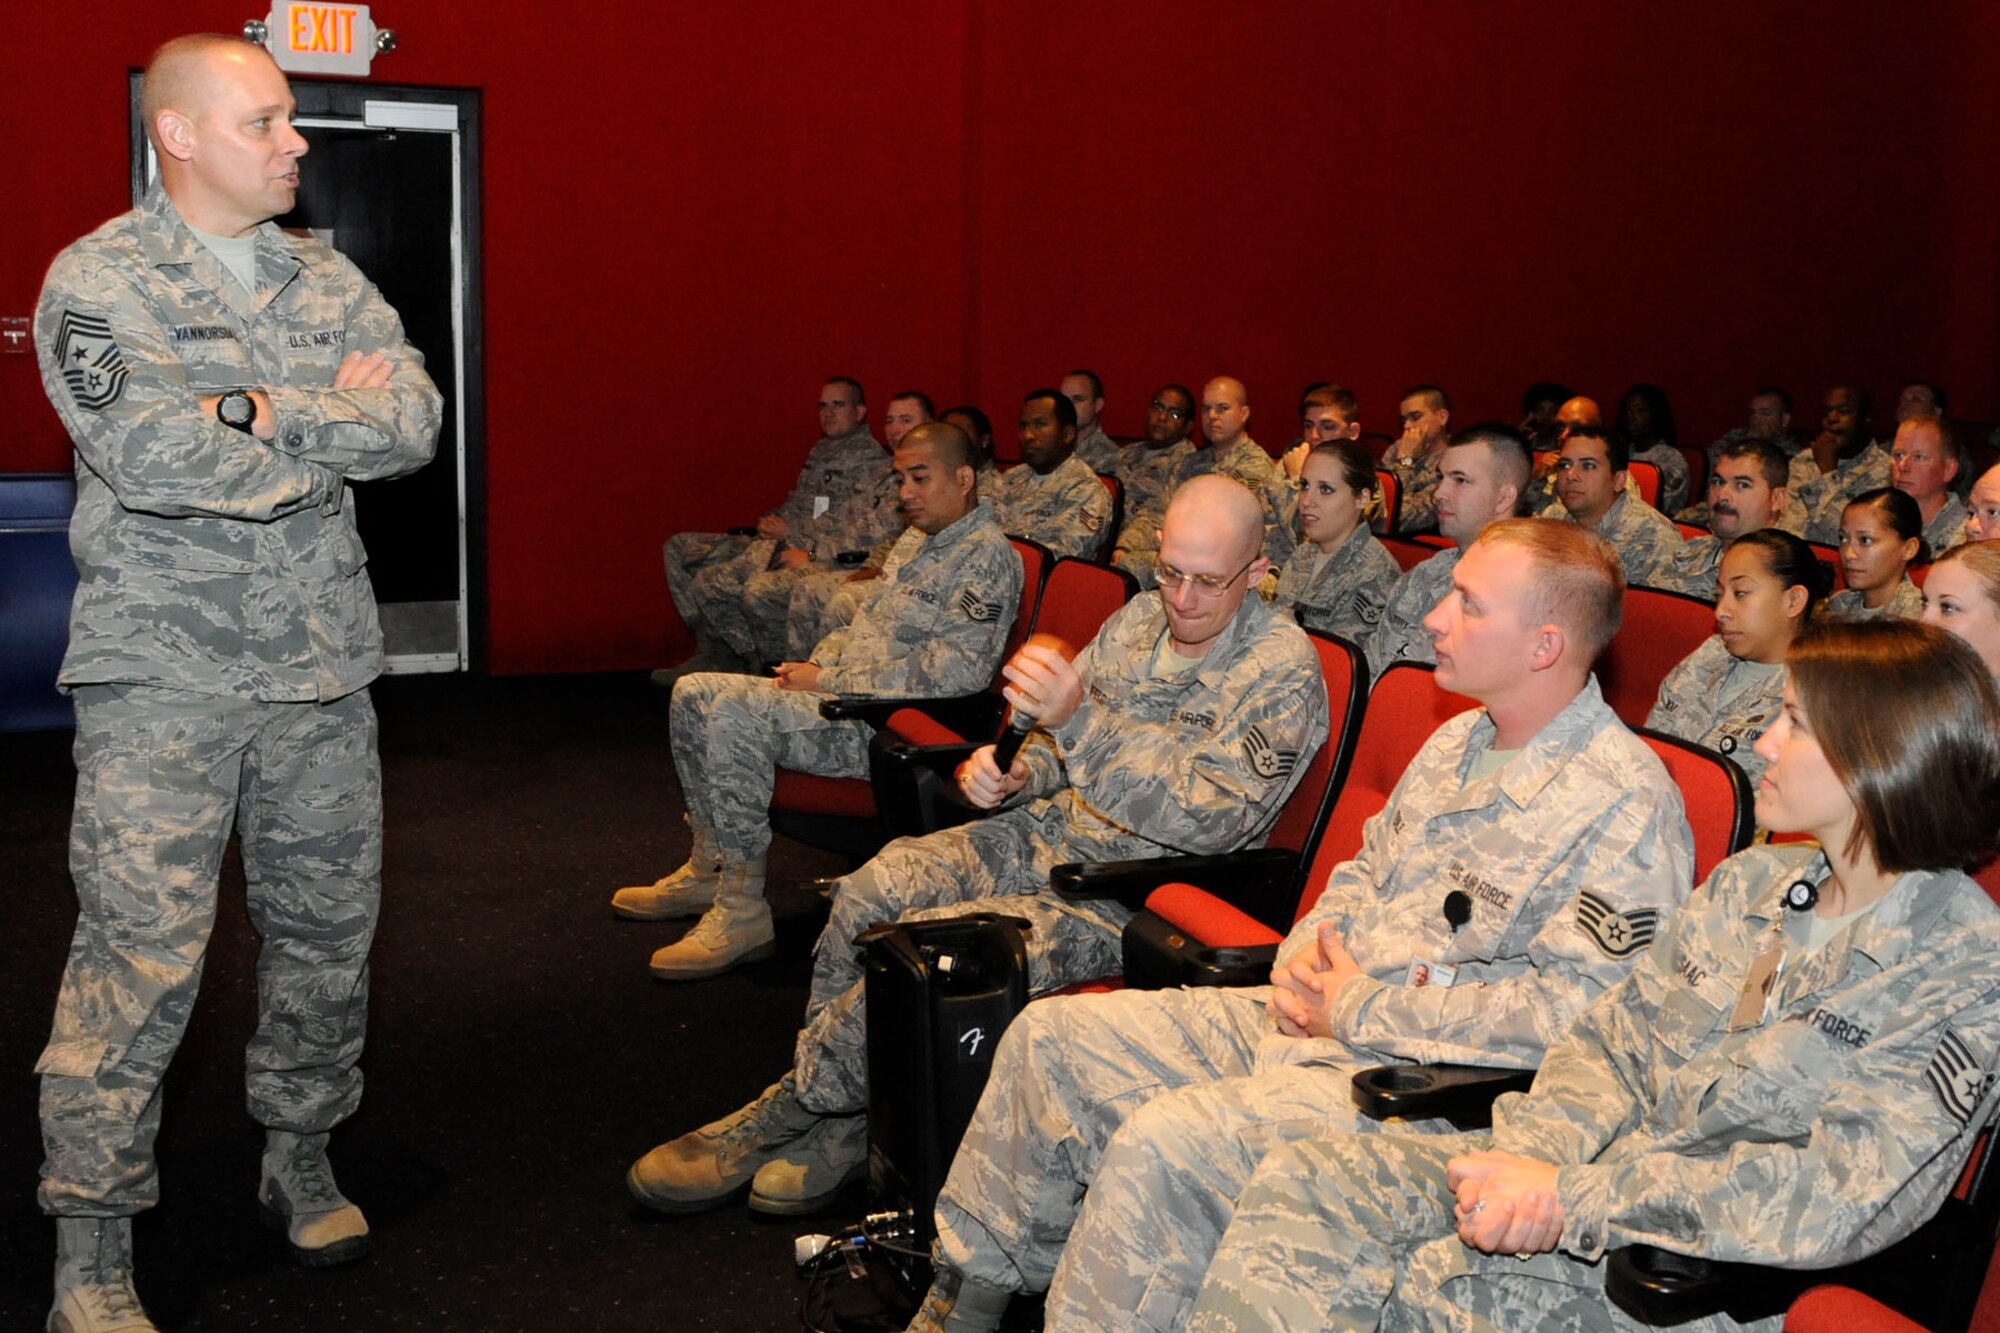 Chief Master Sgt. Dennis Vannorsdall, 3rd Air Force command chief master sergeant, conducts an NCO forum with Team Lajes non-commissioned officers at the base theater Oct. 12, 2010.  The enlisted call was designed to allow Chief Vannorsdall to hear from the enlisted members so he can advise leadership at the 3rd Air Force.  (Photo by Guido Melo)